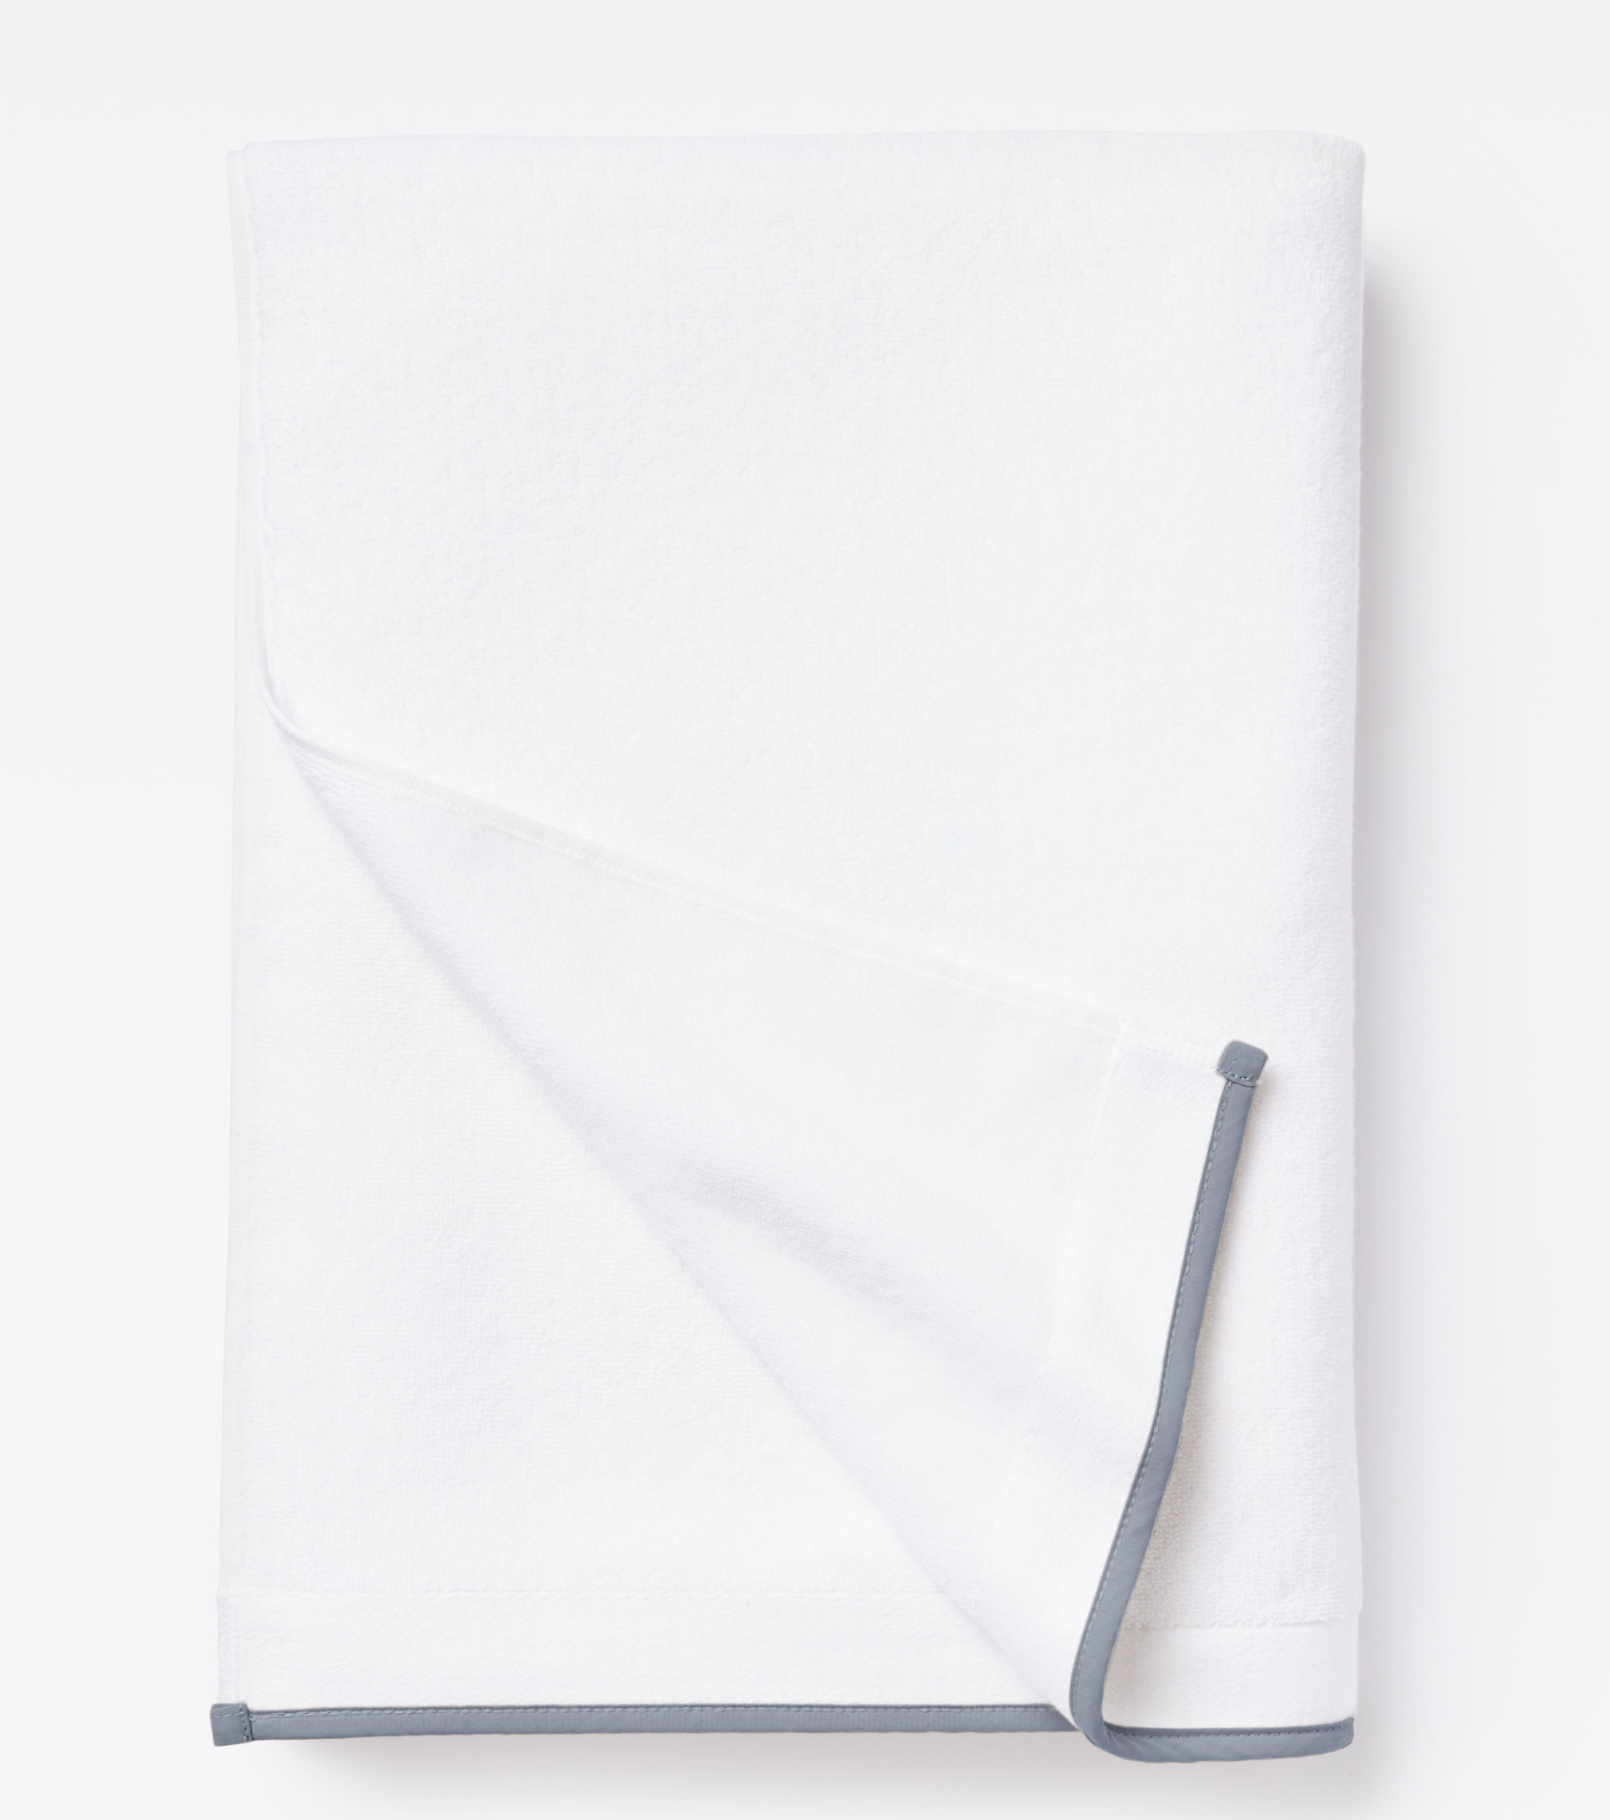 Averylily Border Bath Sheet in White with Stone Grey trim, made from 600-gram weight pure Aegean cotton.